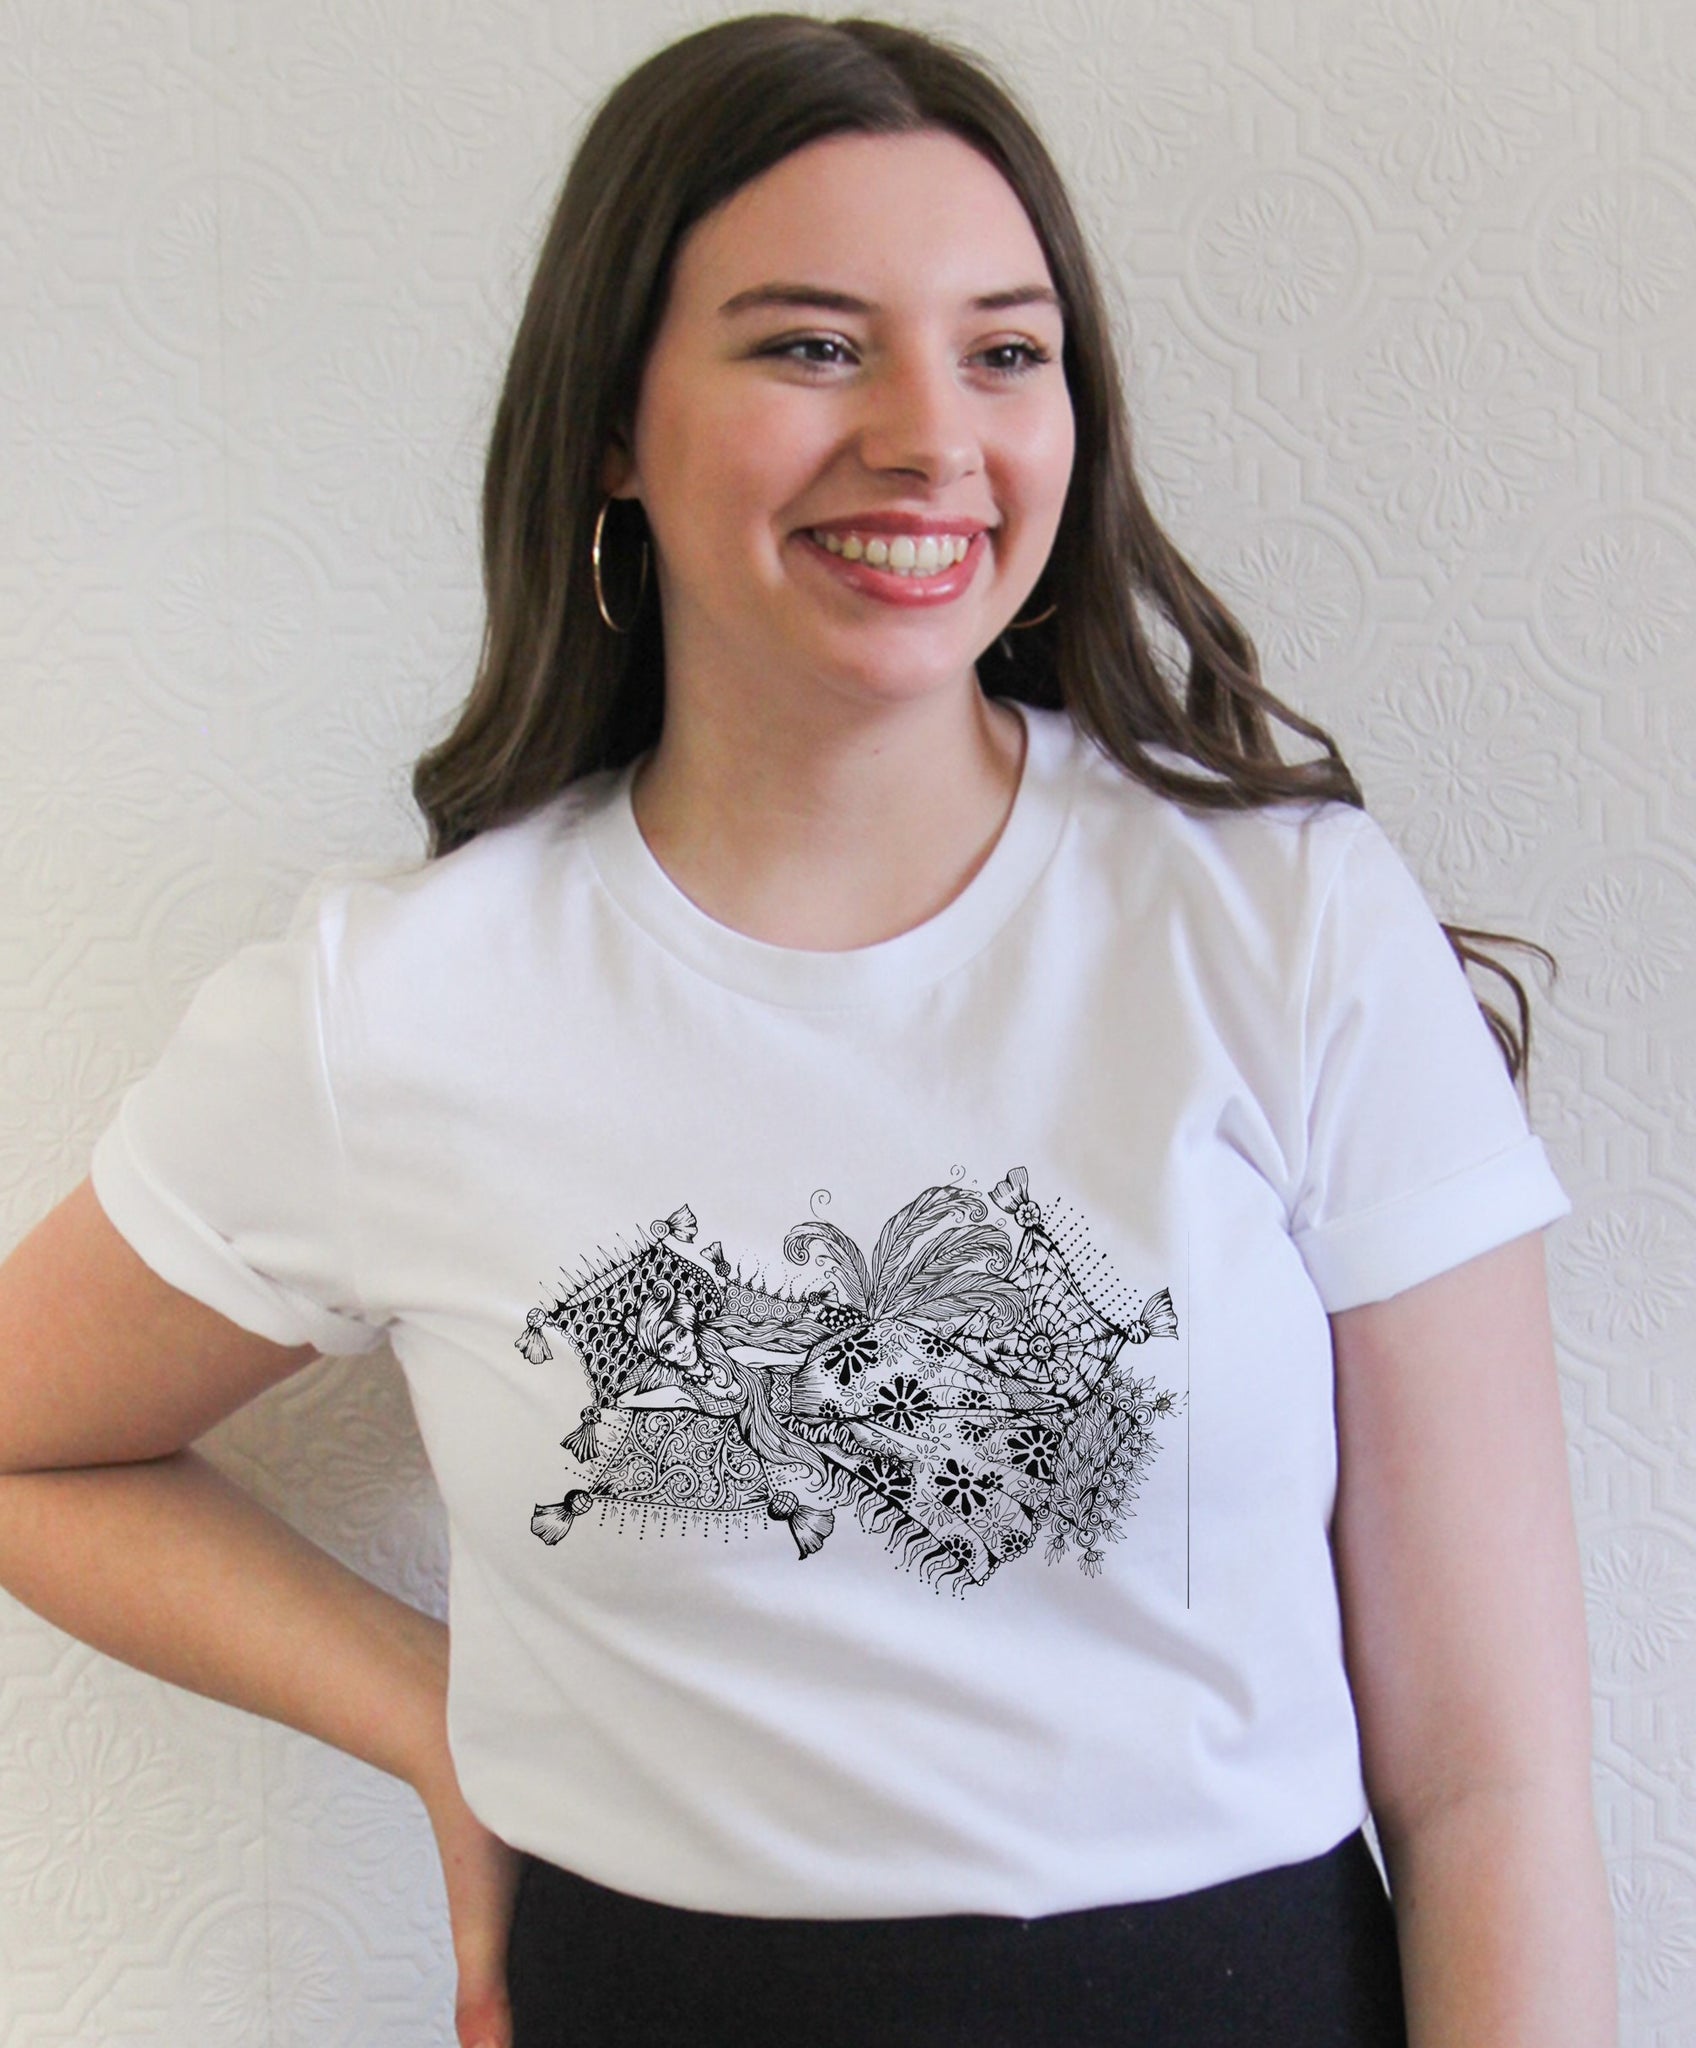 Magic Carpet - Ladies T-Shirt (UK Sizes 8-40) - Artwork by the Very Talented Artist Sarah Neville - Made to Order